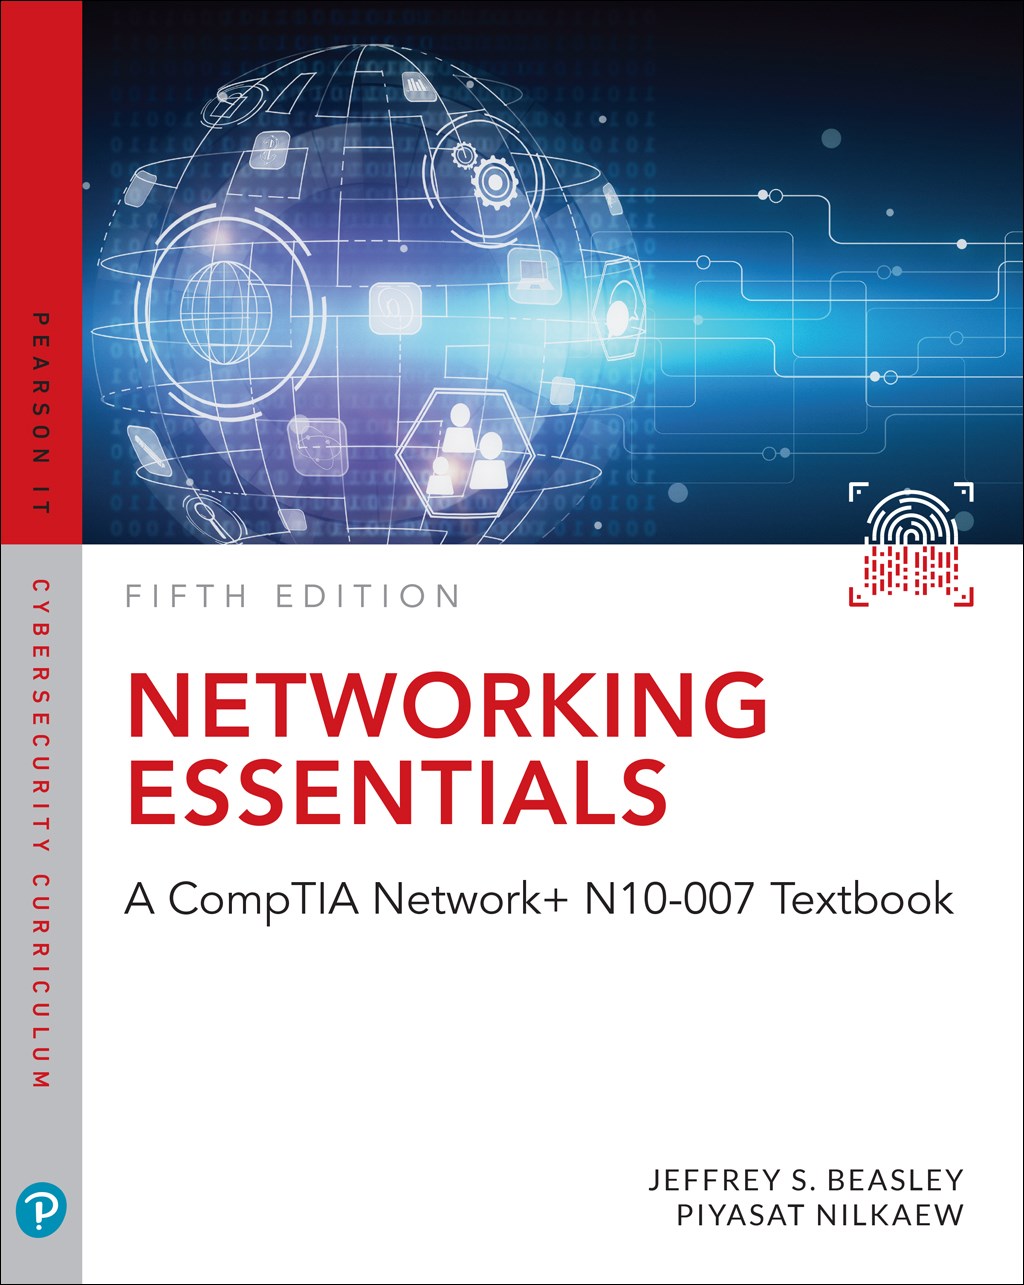 Networking Essentials: A CompTIA Network+ N10-007 Textbook, 5th Edition